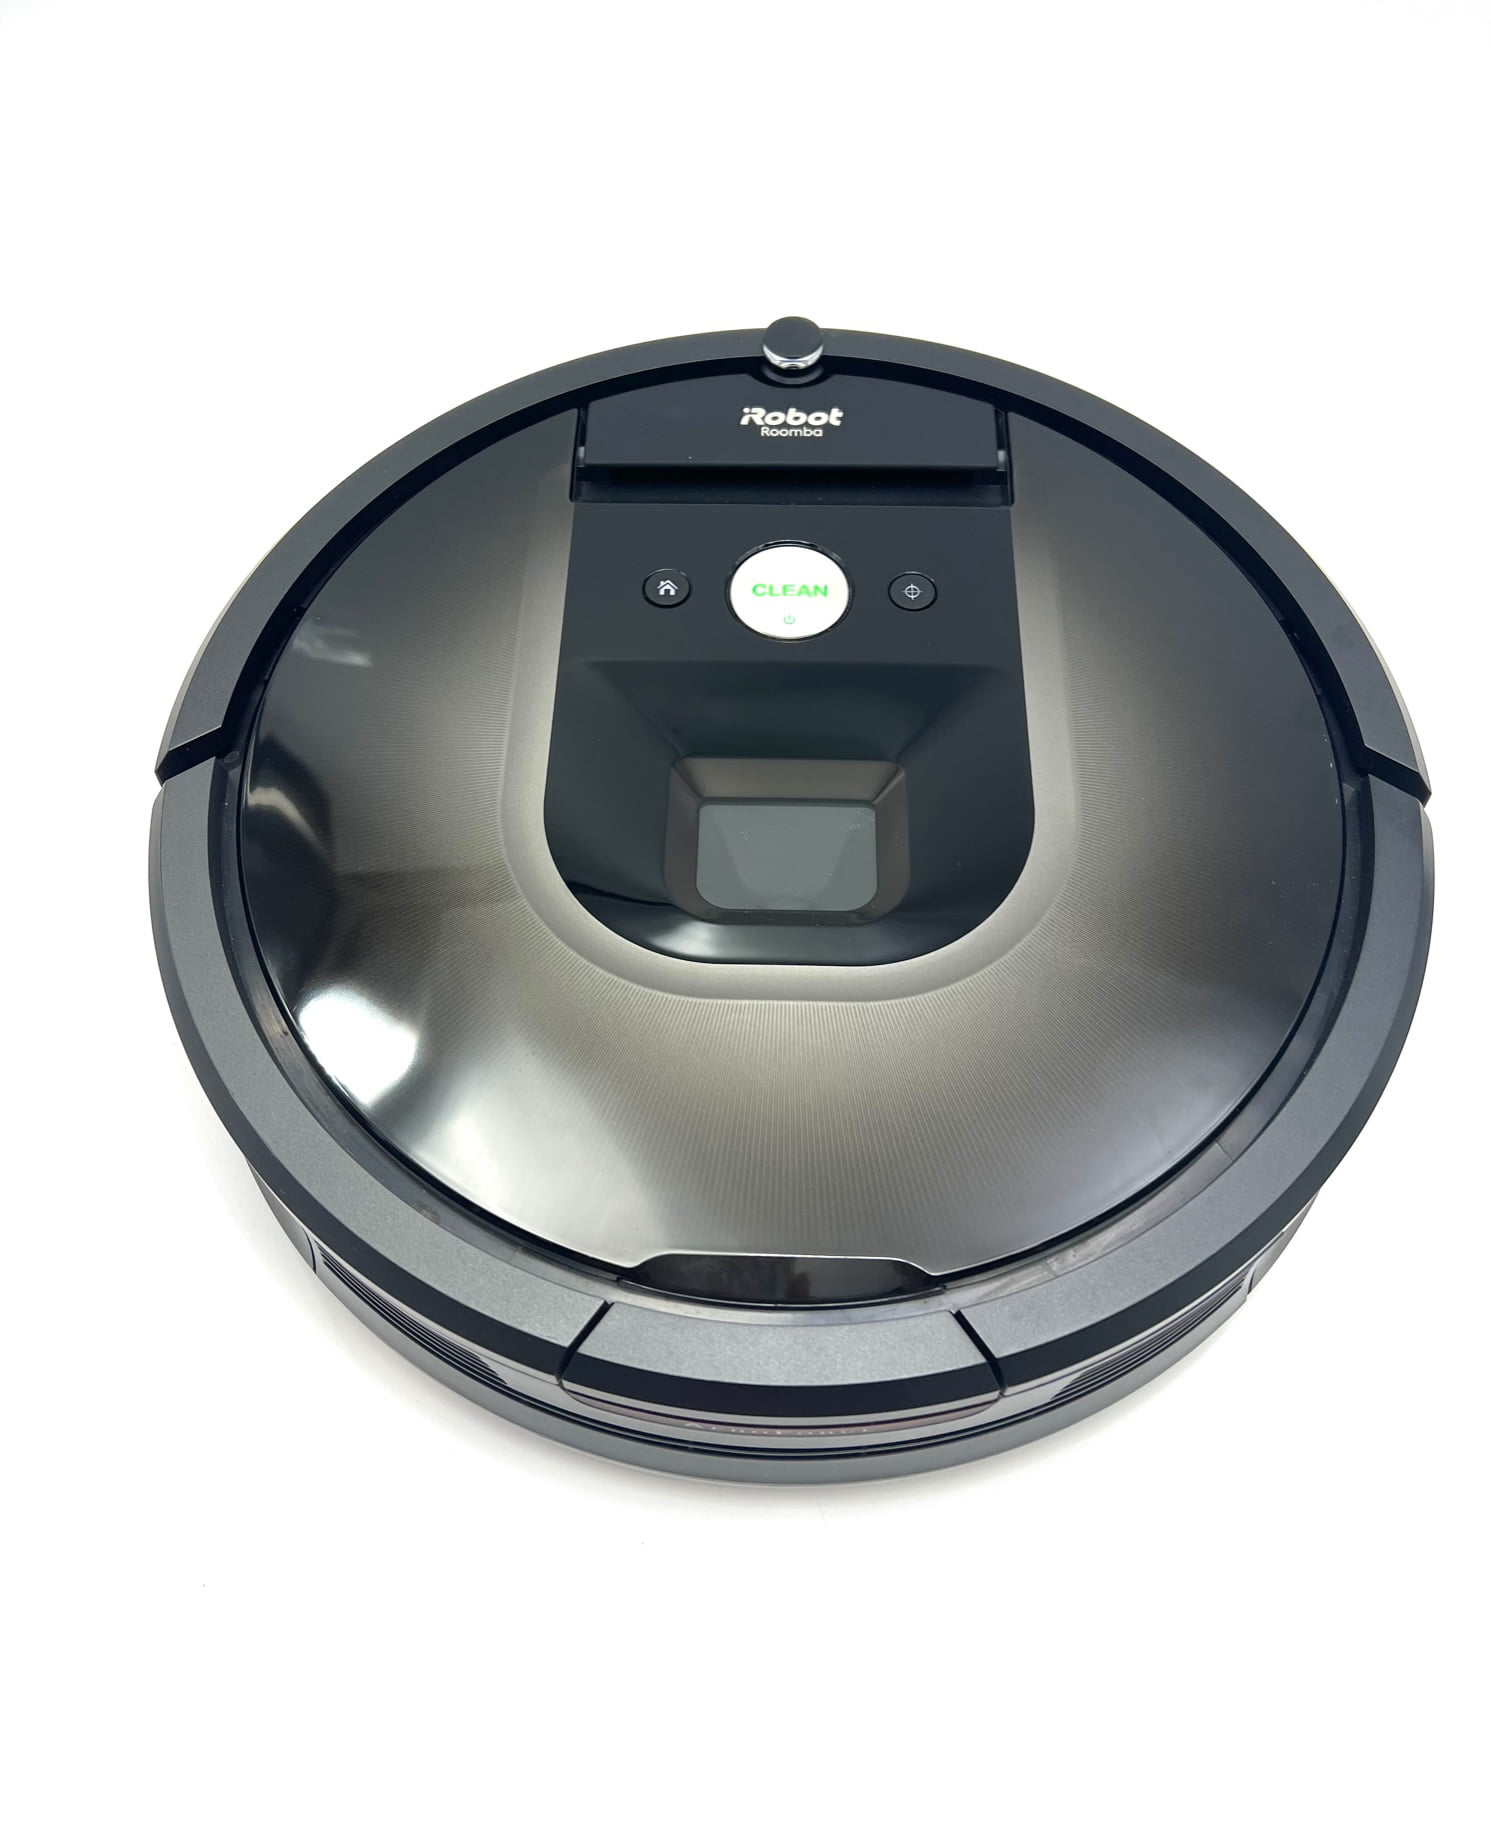 Open Box iRobot Roomba 980 Robot Vacuum-Wi-Fi Connected Mapping